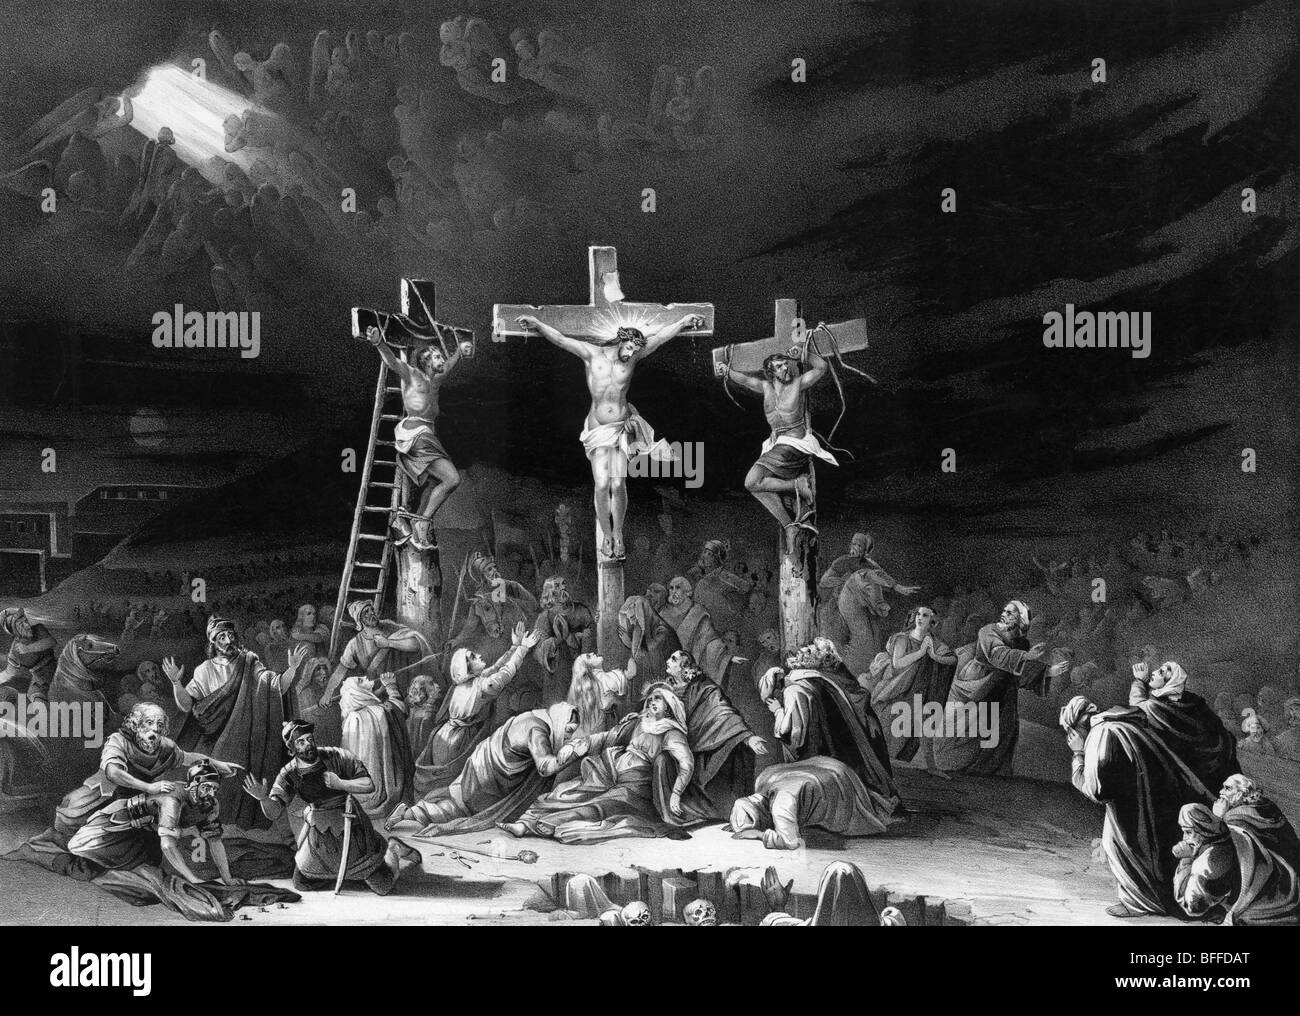 Print depicting the crucifixion of Jesus Christ at Golgotha, outside the walls of ancient Jerusalem, in the first century AD. Stock Photo